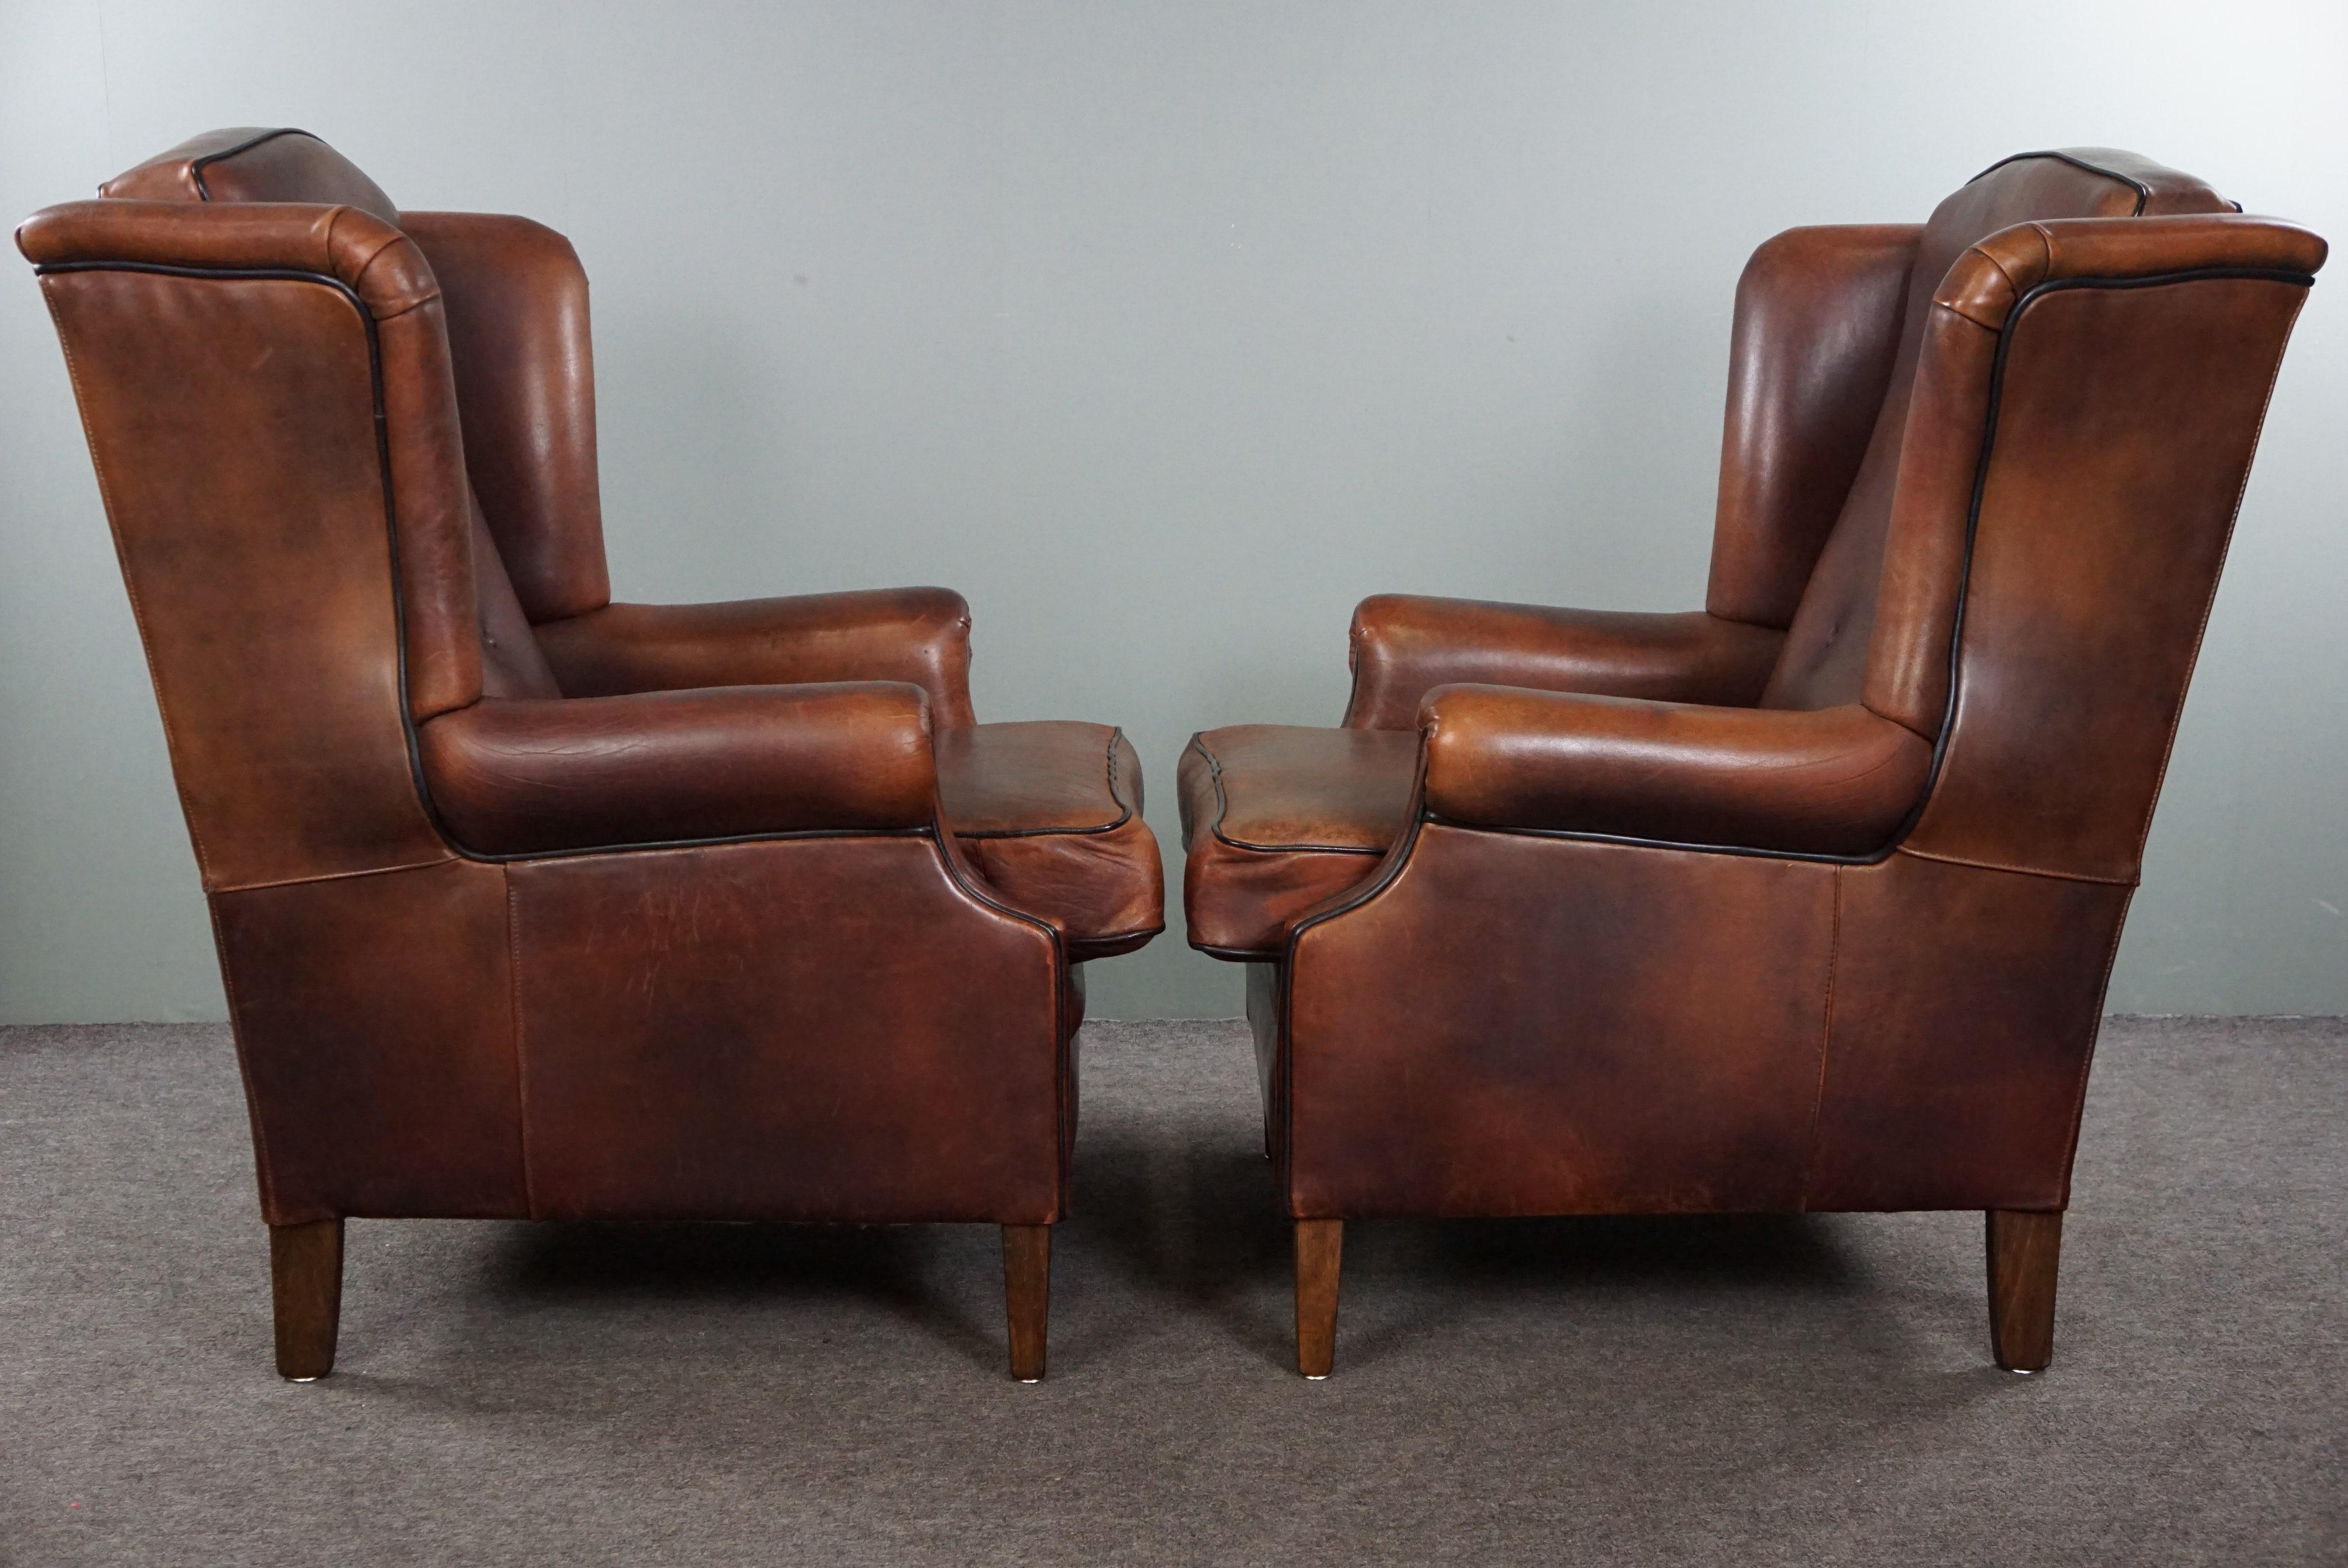 Offered is this well-fitting set of sheep leather wing chairs with charming compartments in the leather.

This comfortable and brightly colored set of two armchairs is a very good addition to almost any interior. The shape, the finish with the black